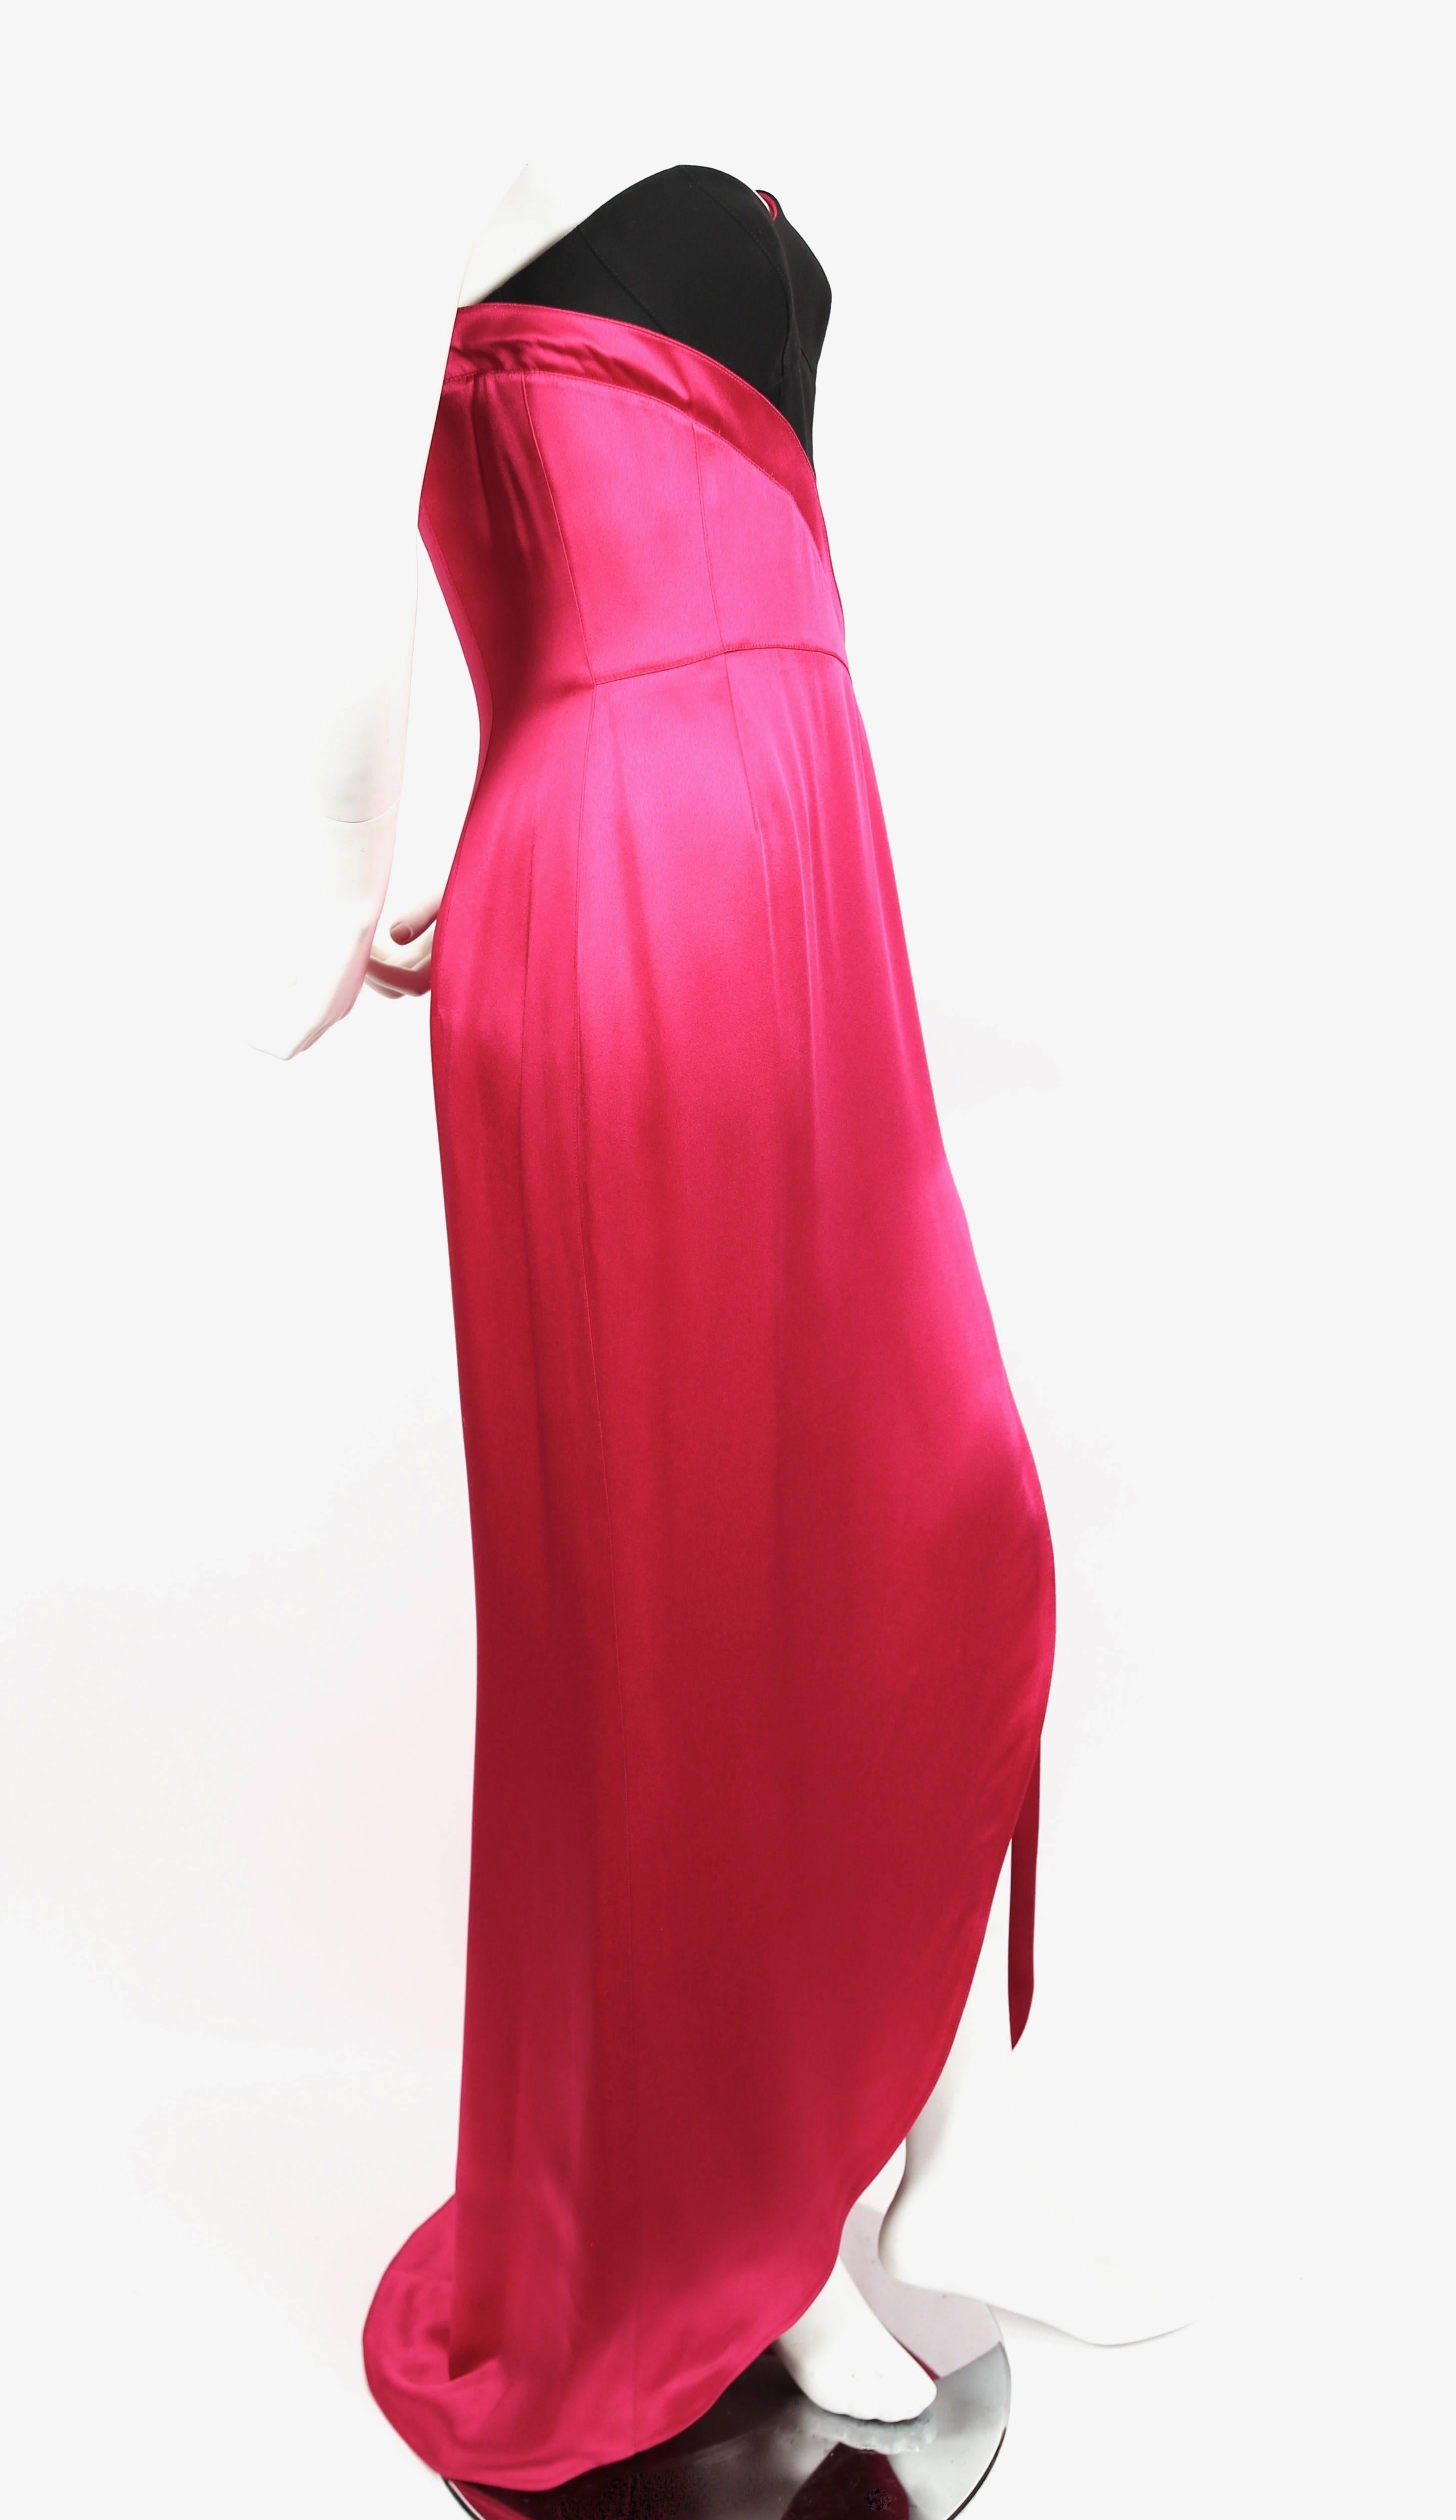 Stunning fuchsia charmeuse gown with seamed black bodice designed by Thierry Mugler dating to the early 1990's. Dress is labeled a French size 40, which is best suited for a US 4 or small 6 (bodice is small). Approximate measurements are as follows: